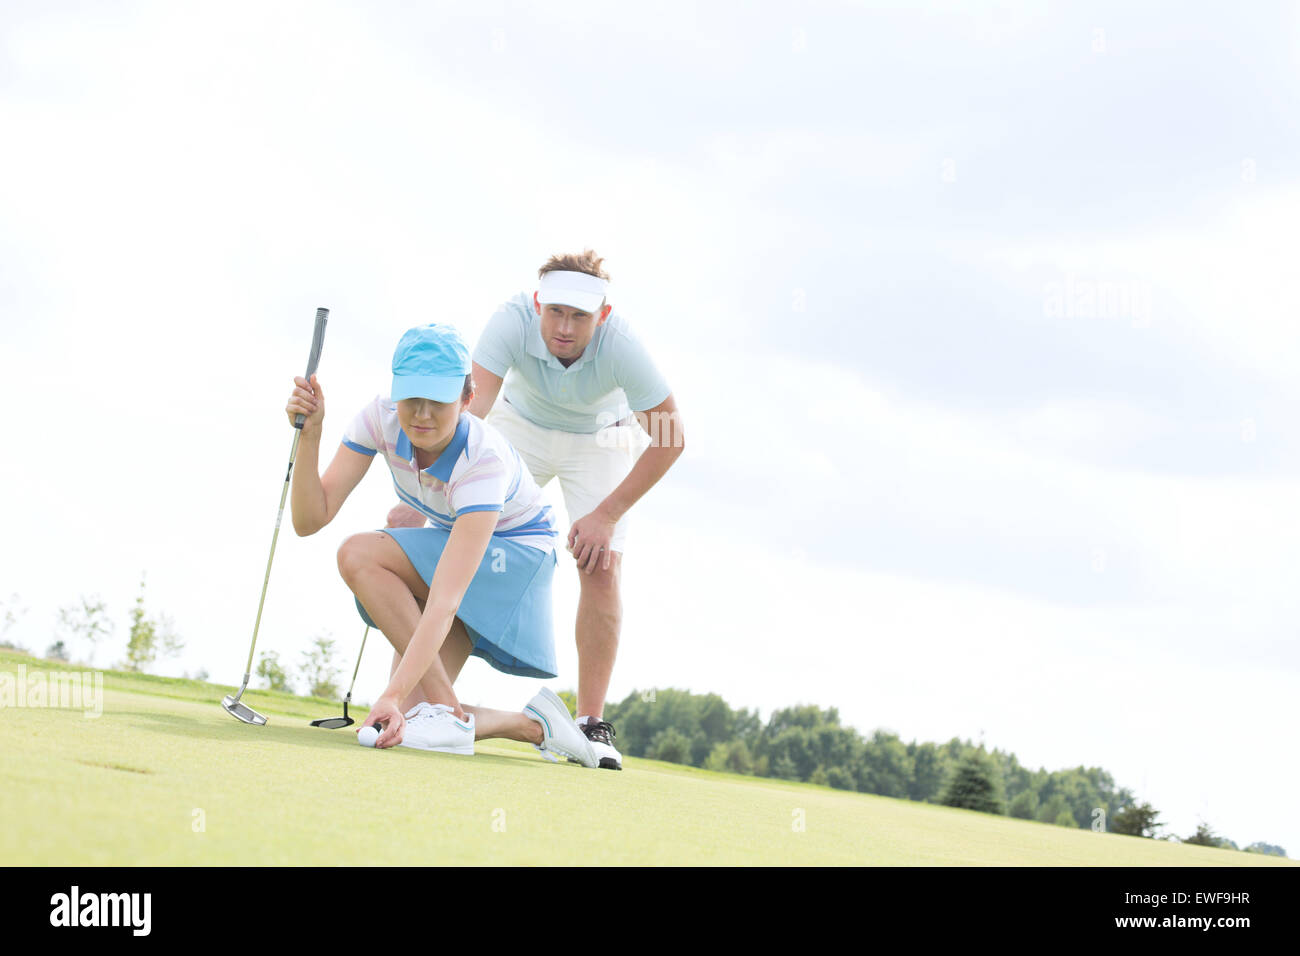 Mid-adult man looking at woman aiming ball on golf course Stock Photo